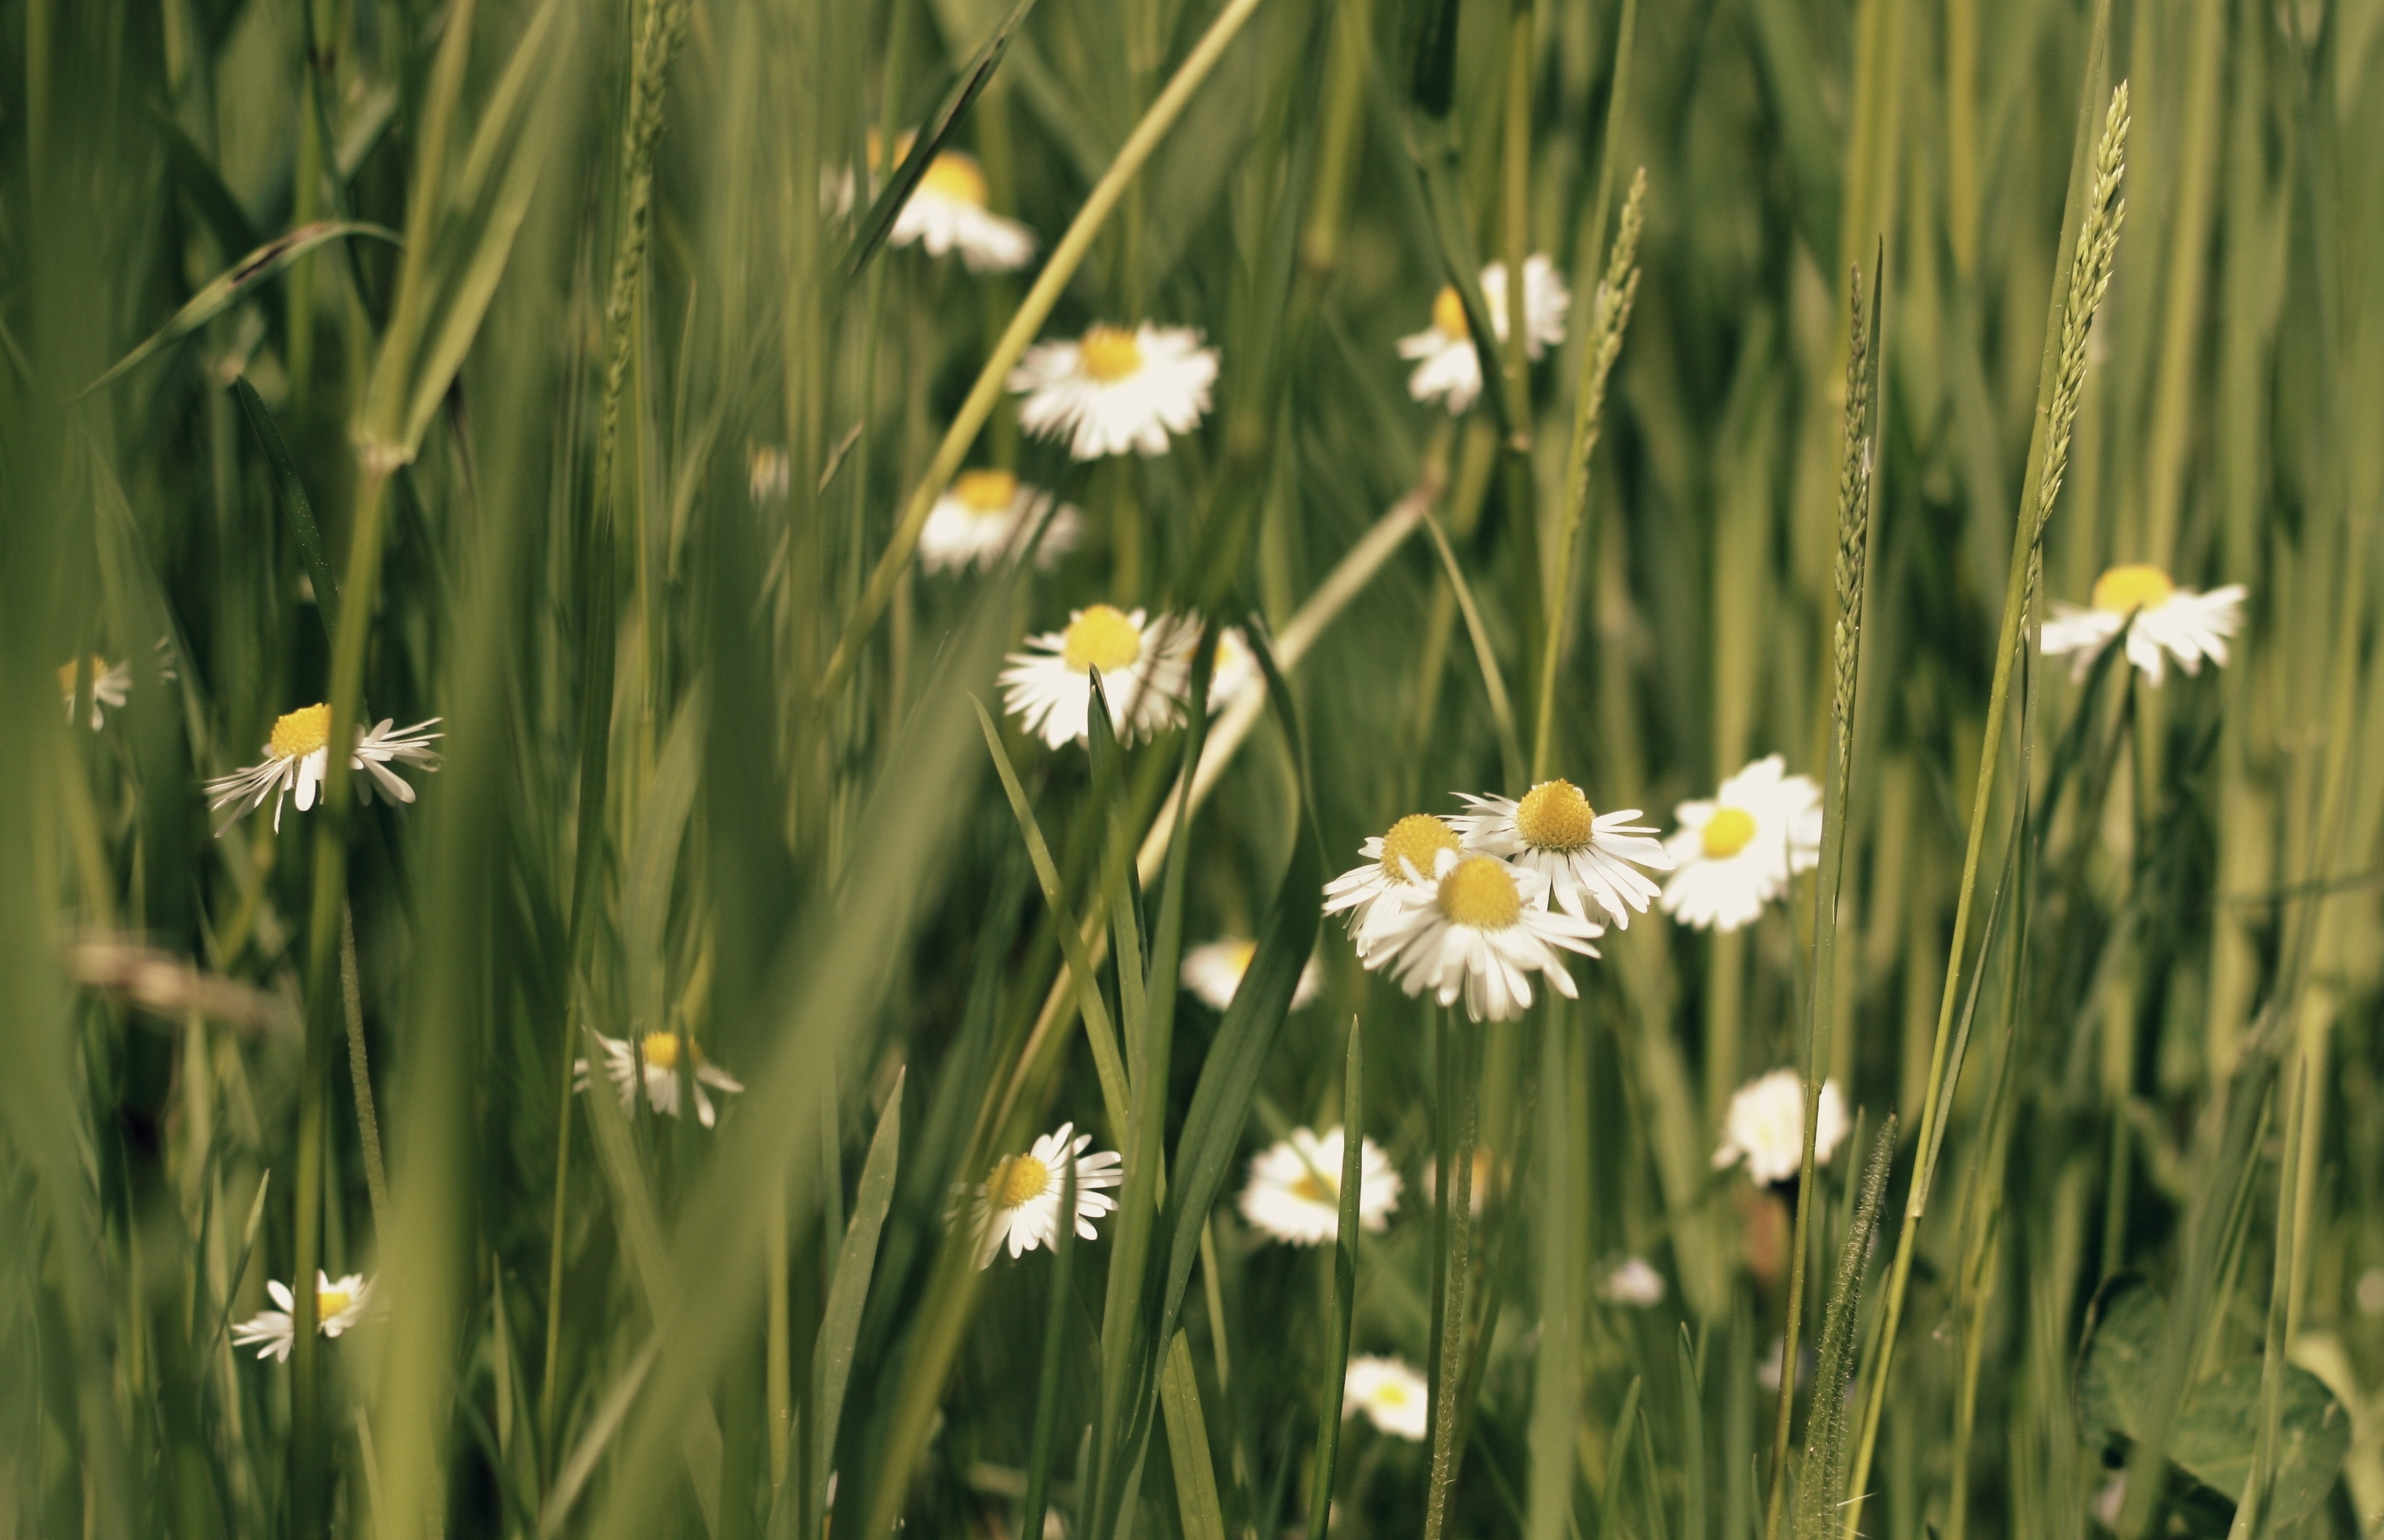 shallow photography of white daisy flowers